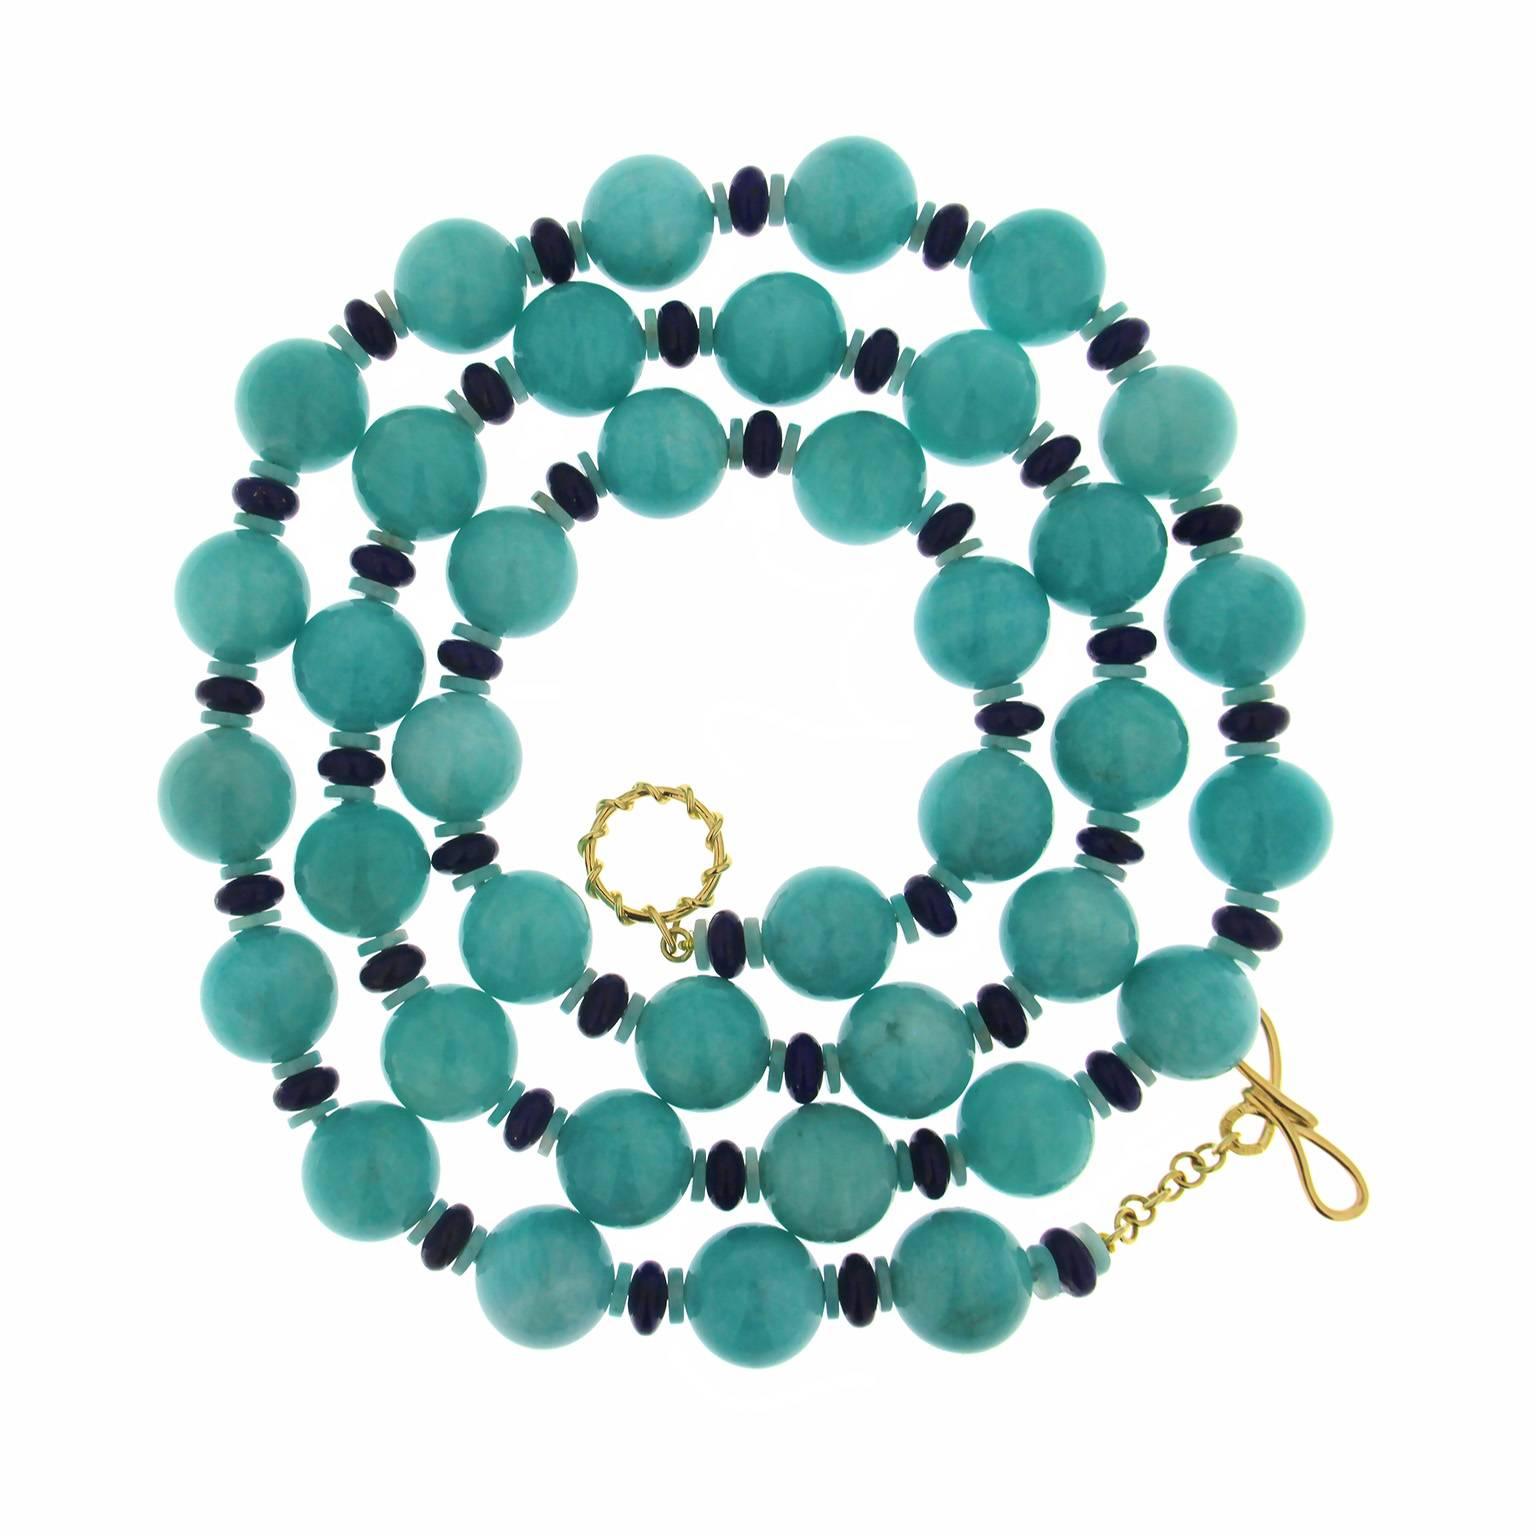 This unique necklace is designed with 16mm amazonite Balls and double 8mm lapis lazuli rondelles in between. The necklace is finished with 18kt yellow gold ring and toggle clasp. The result is an exquisite jewel and the perfect gift for any